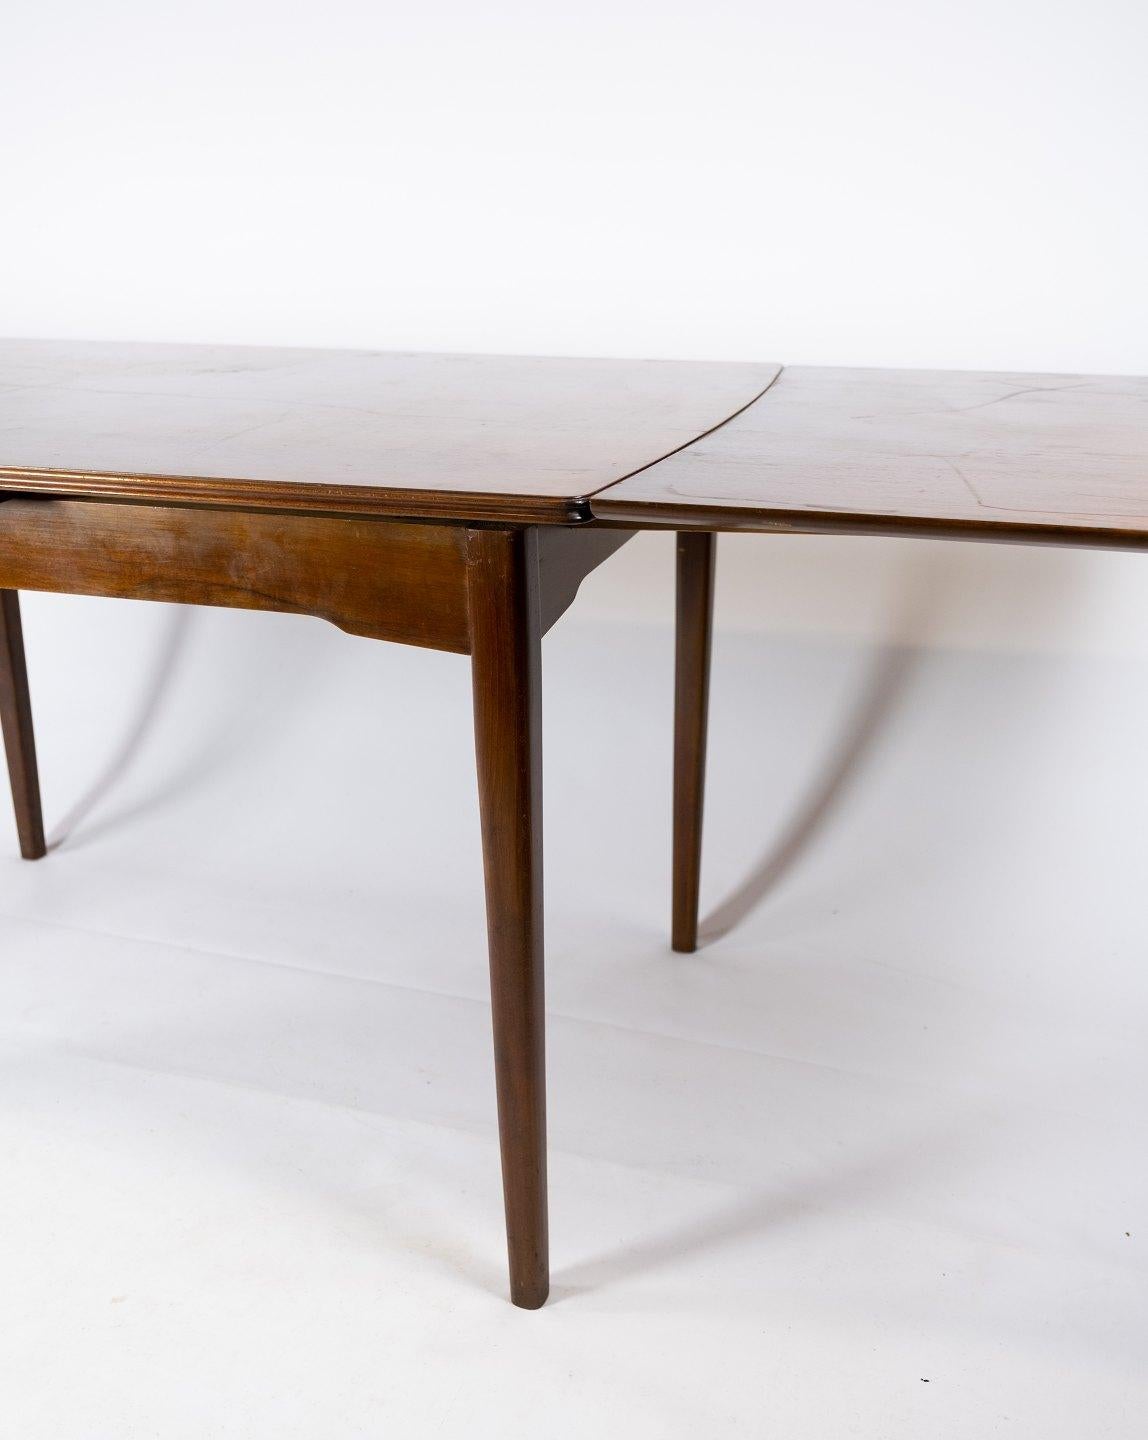 Dining Table Made In Walnut With Extension, Danish Design From 1960s For Sale 2